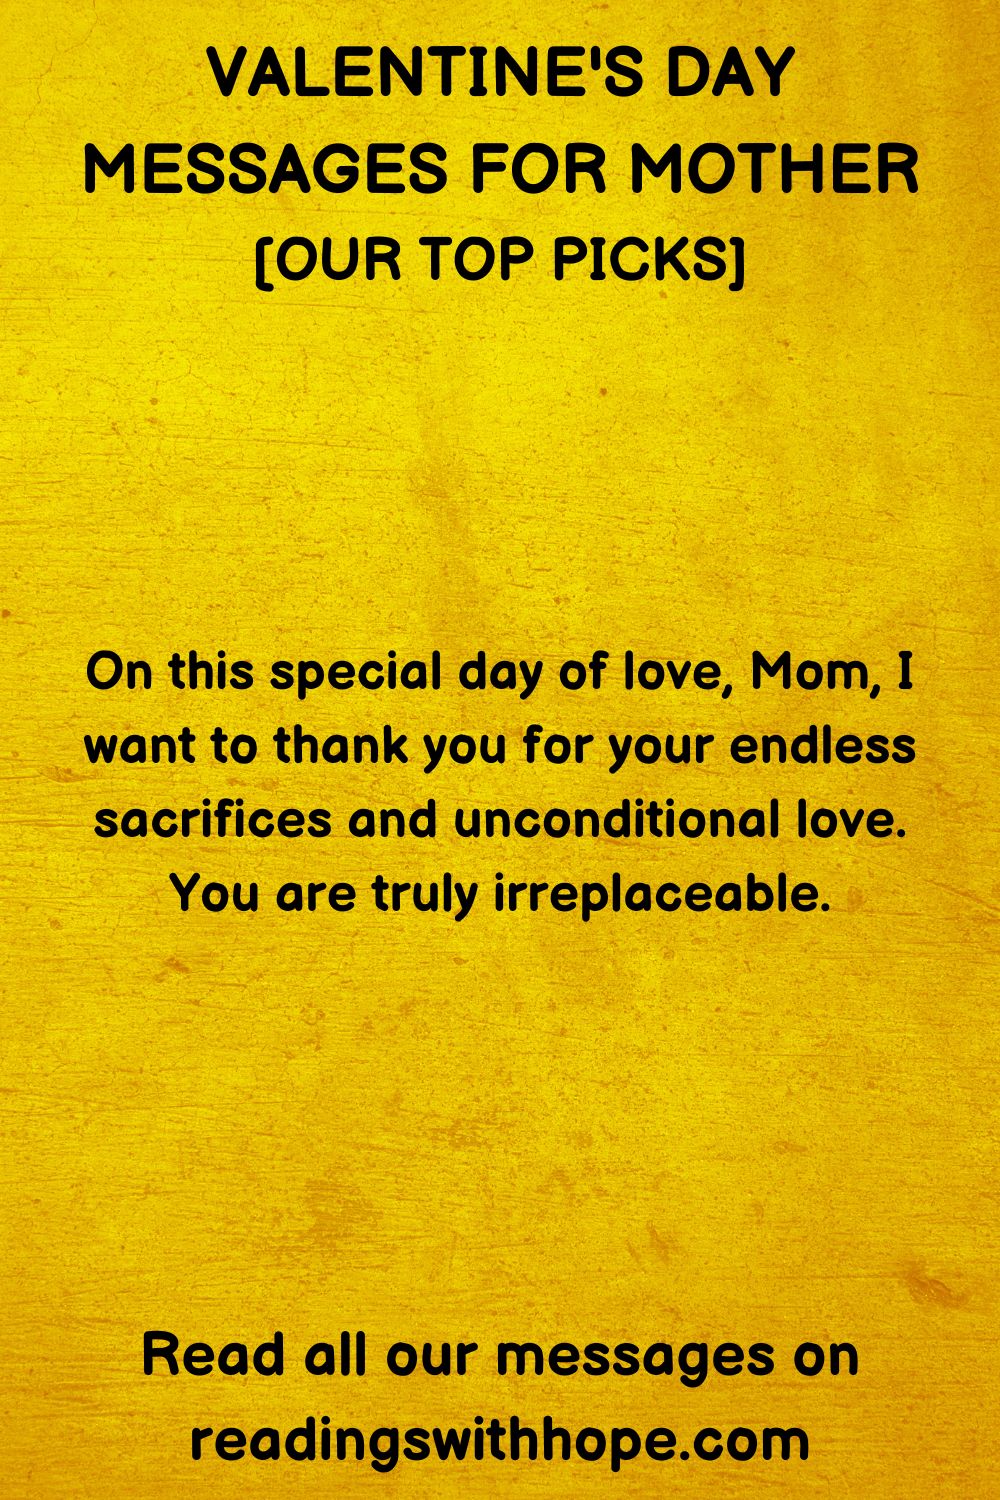 55 Valentine's Day Messages For Mother